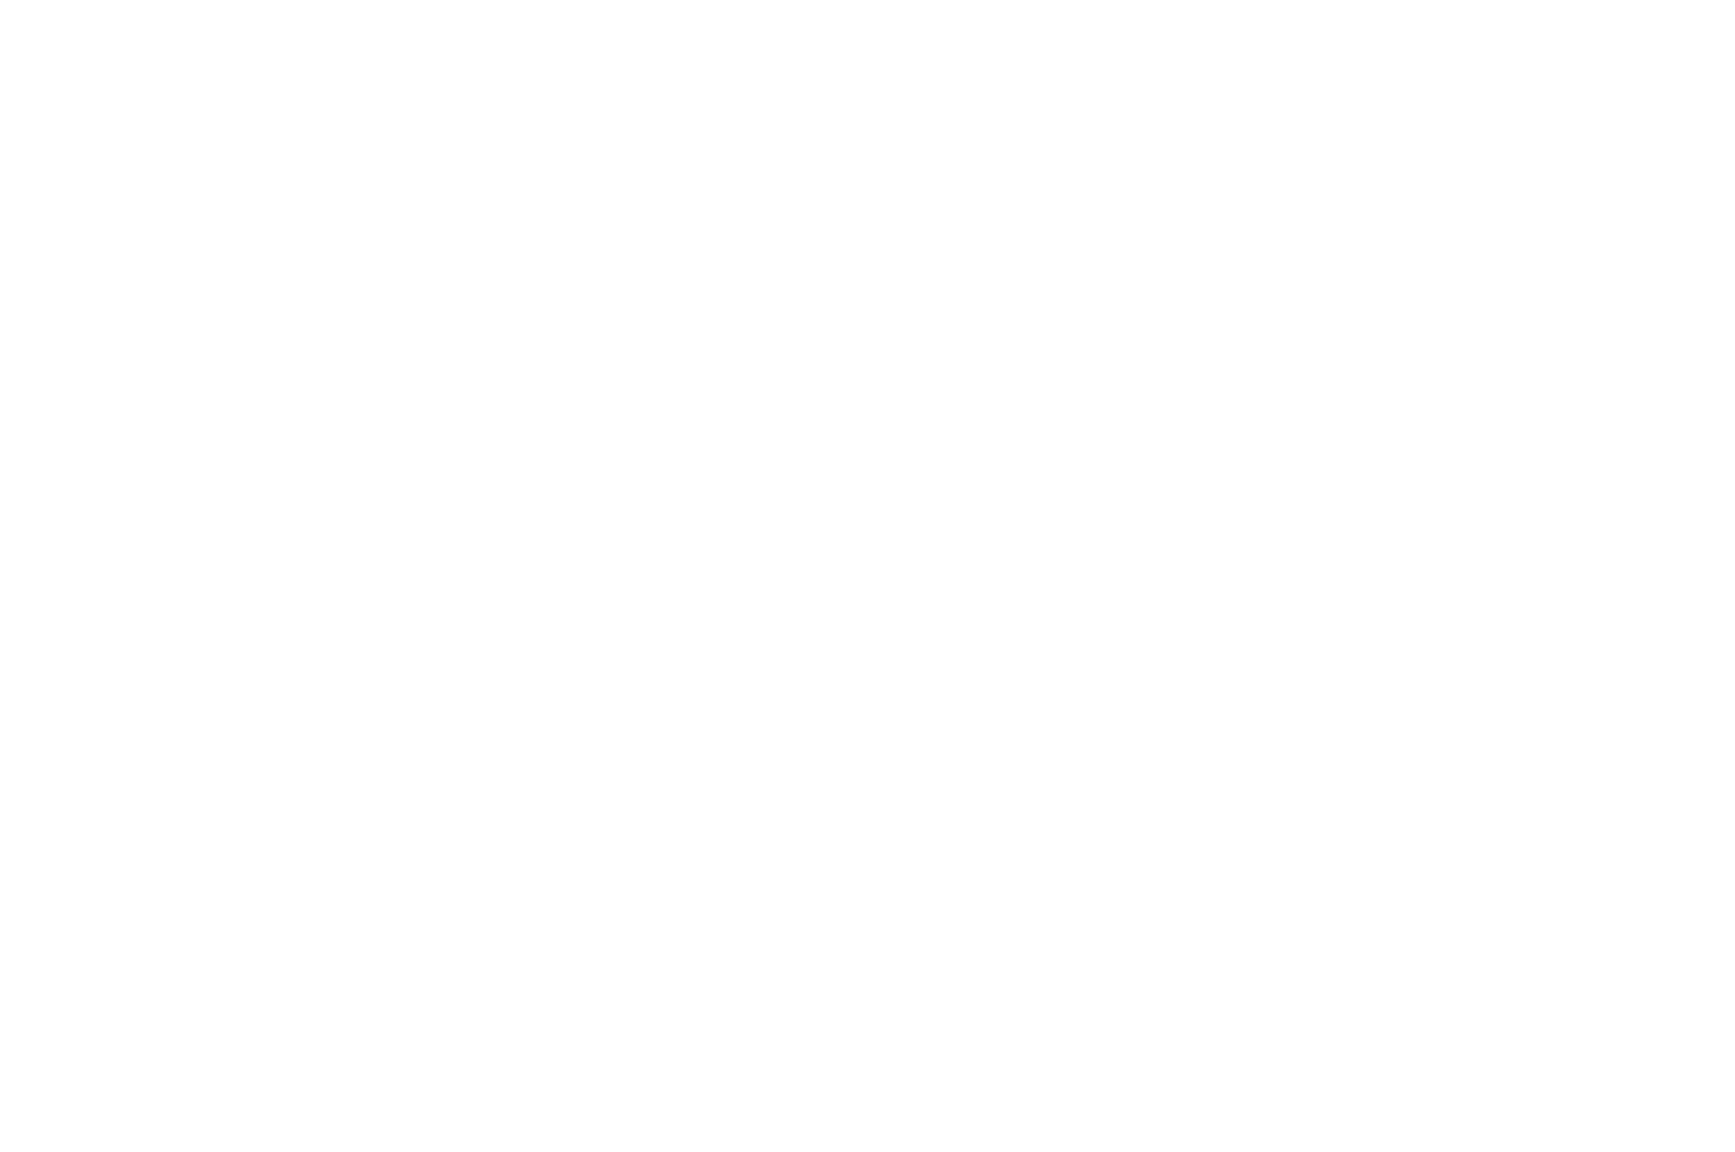 OFFICIAL SELECTION - TOFF - Monthly 2016 Edition.png